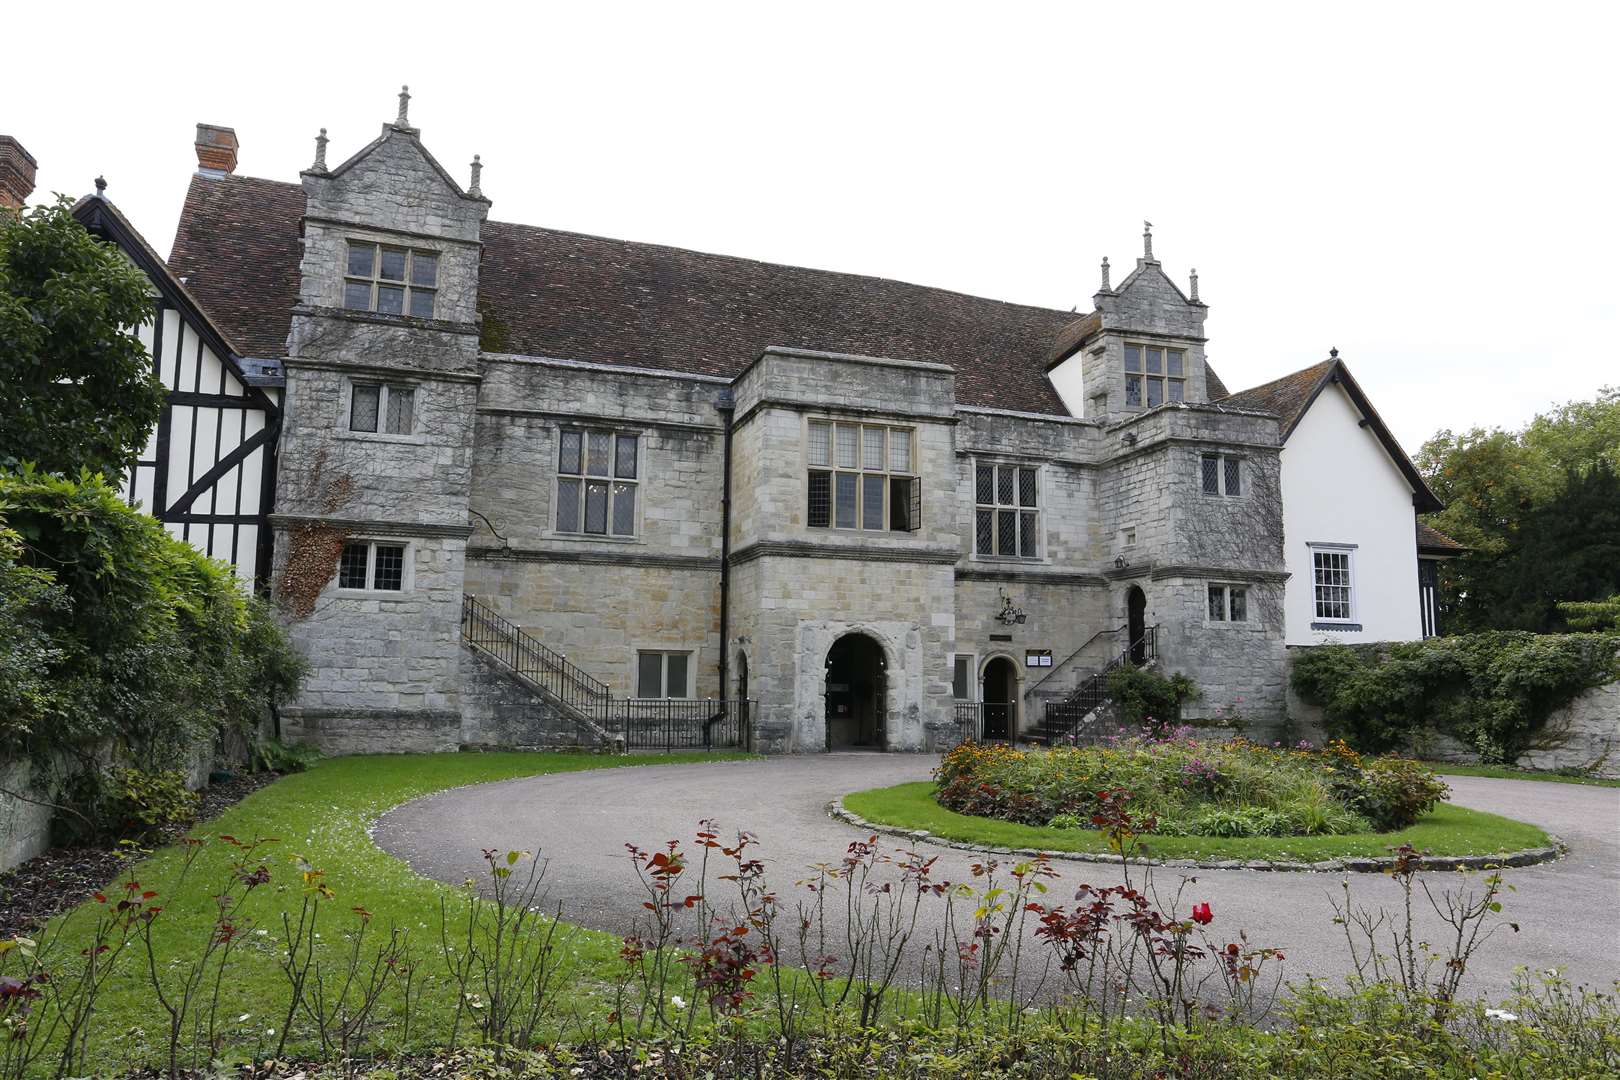 The inquest was heard at Archbishop's Palace, Maidstone. Picture: Andy Jones